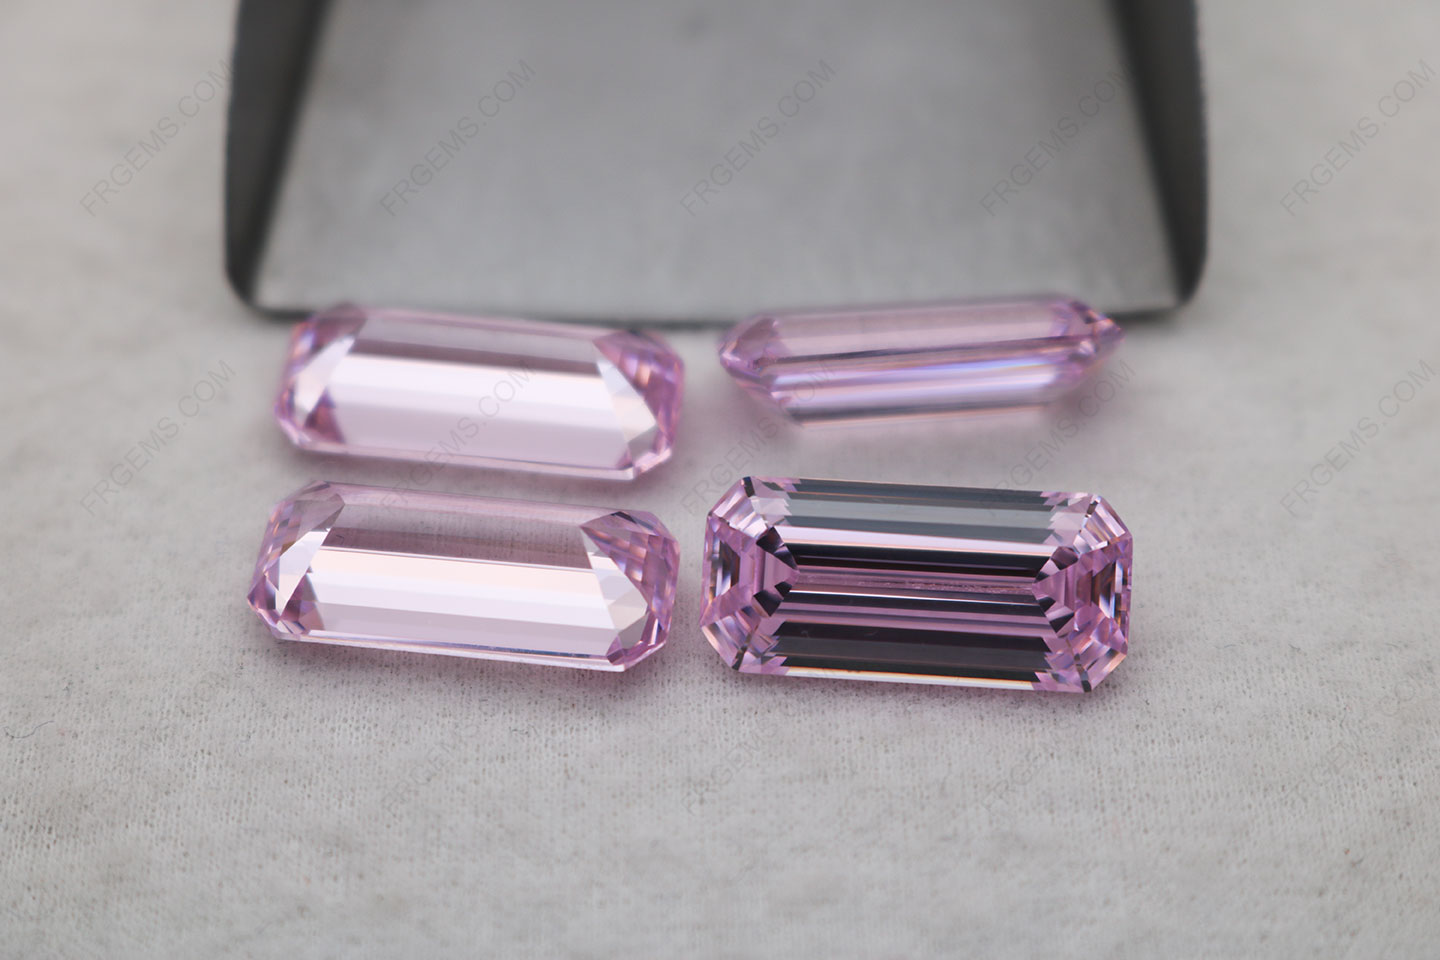 Asscher Cut Cubic Zirconia Light Pink Color 19.5x9mm gemstones wholesale from china